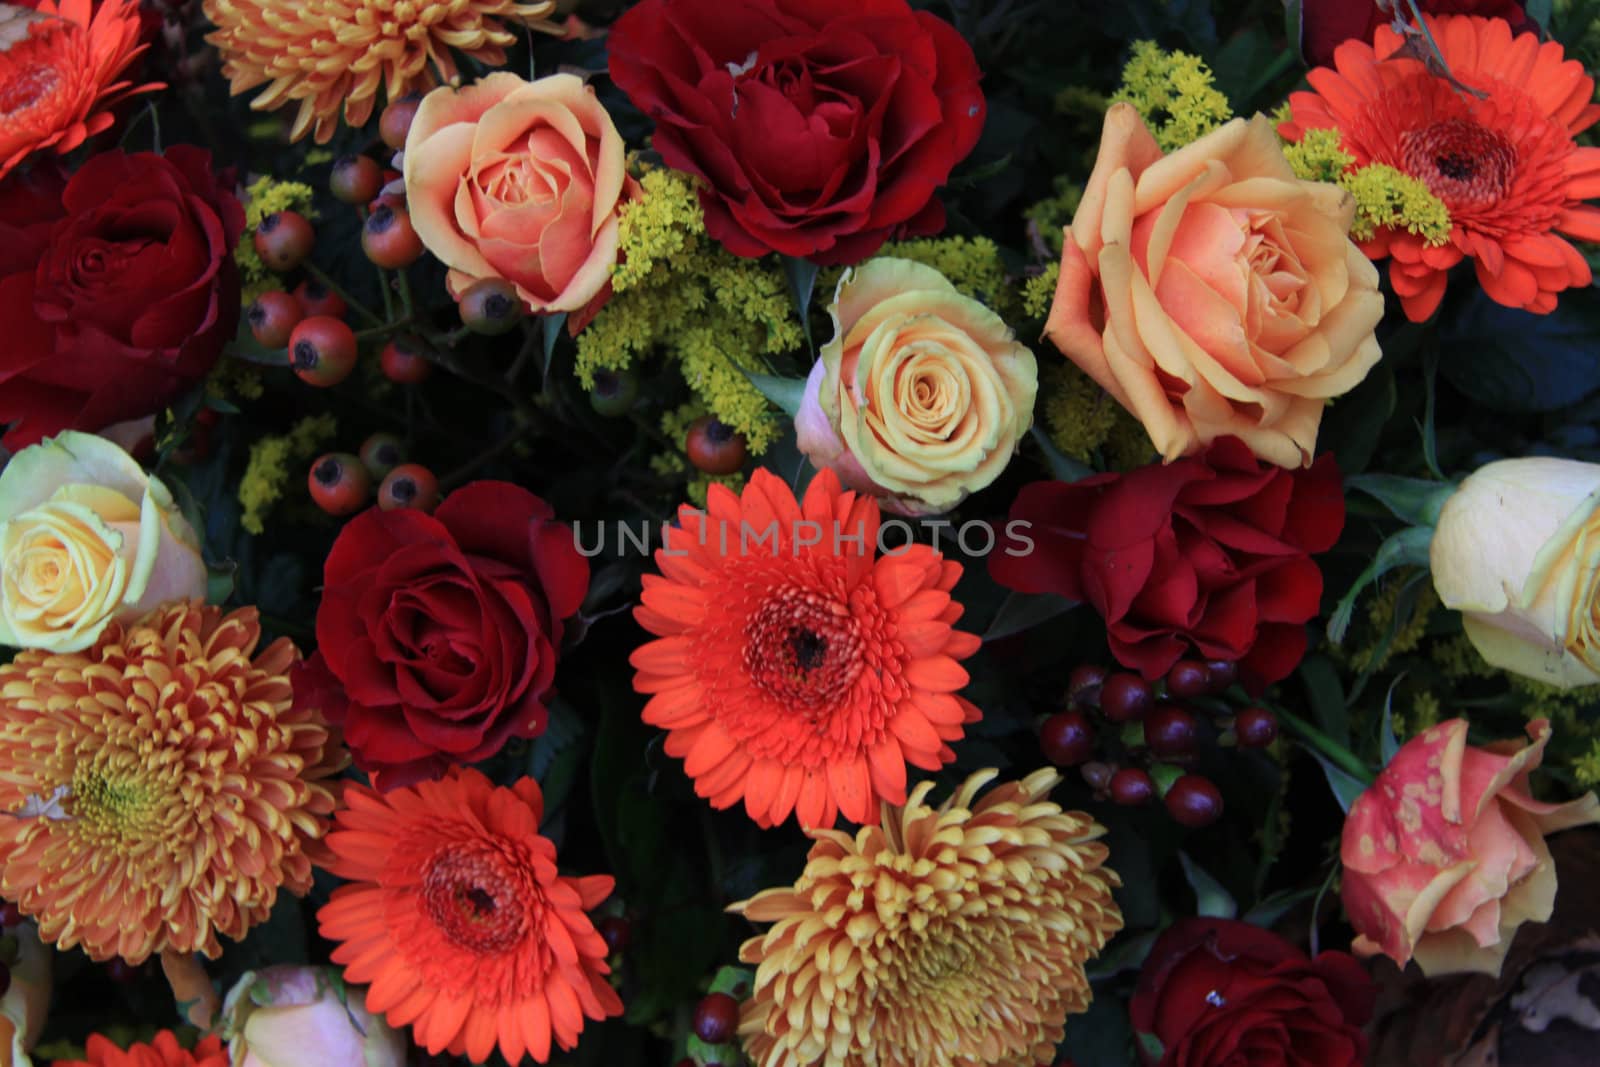 Floral arrangement in different shades of red and orange. Roses and mums